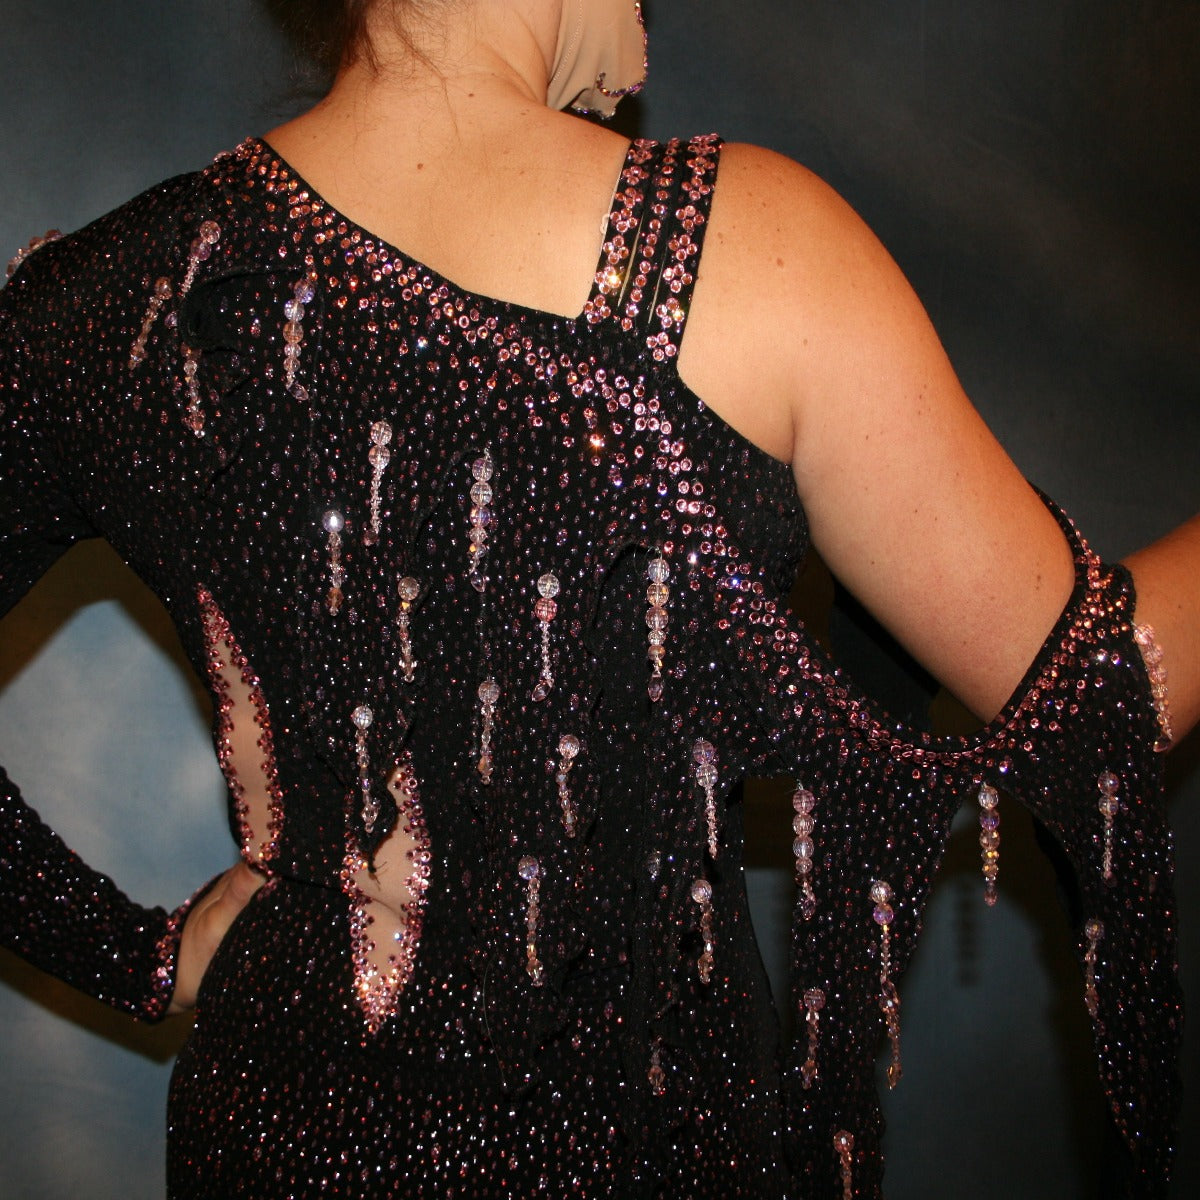 Crystal's Creations close back view of black Latin/rhythm dress created of black glitter slinky with light pink glitter accents that look like champagne bubbles, is embellished with light rose pink Swarovski rhinestone work & hand beading